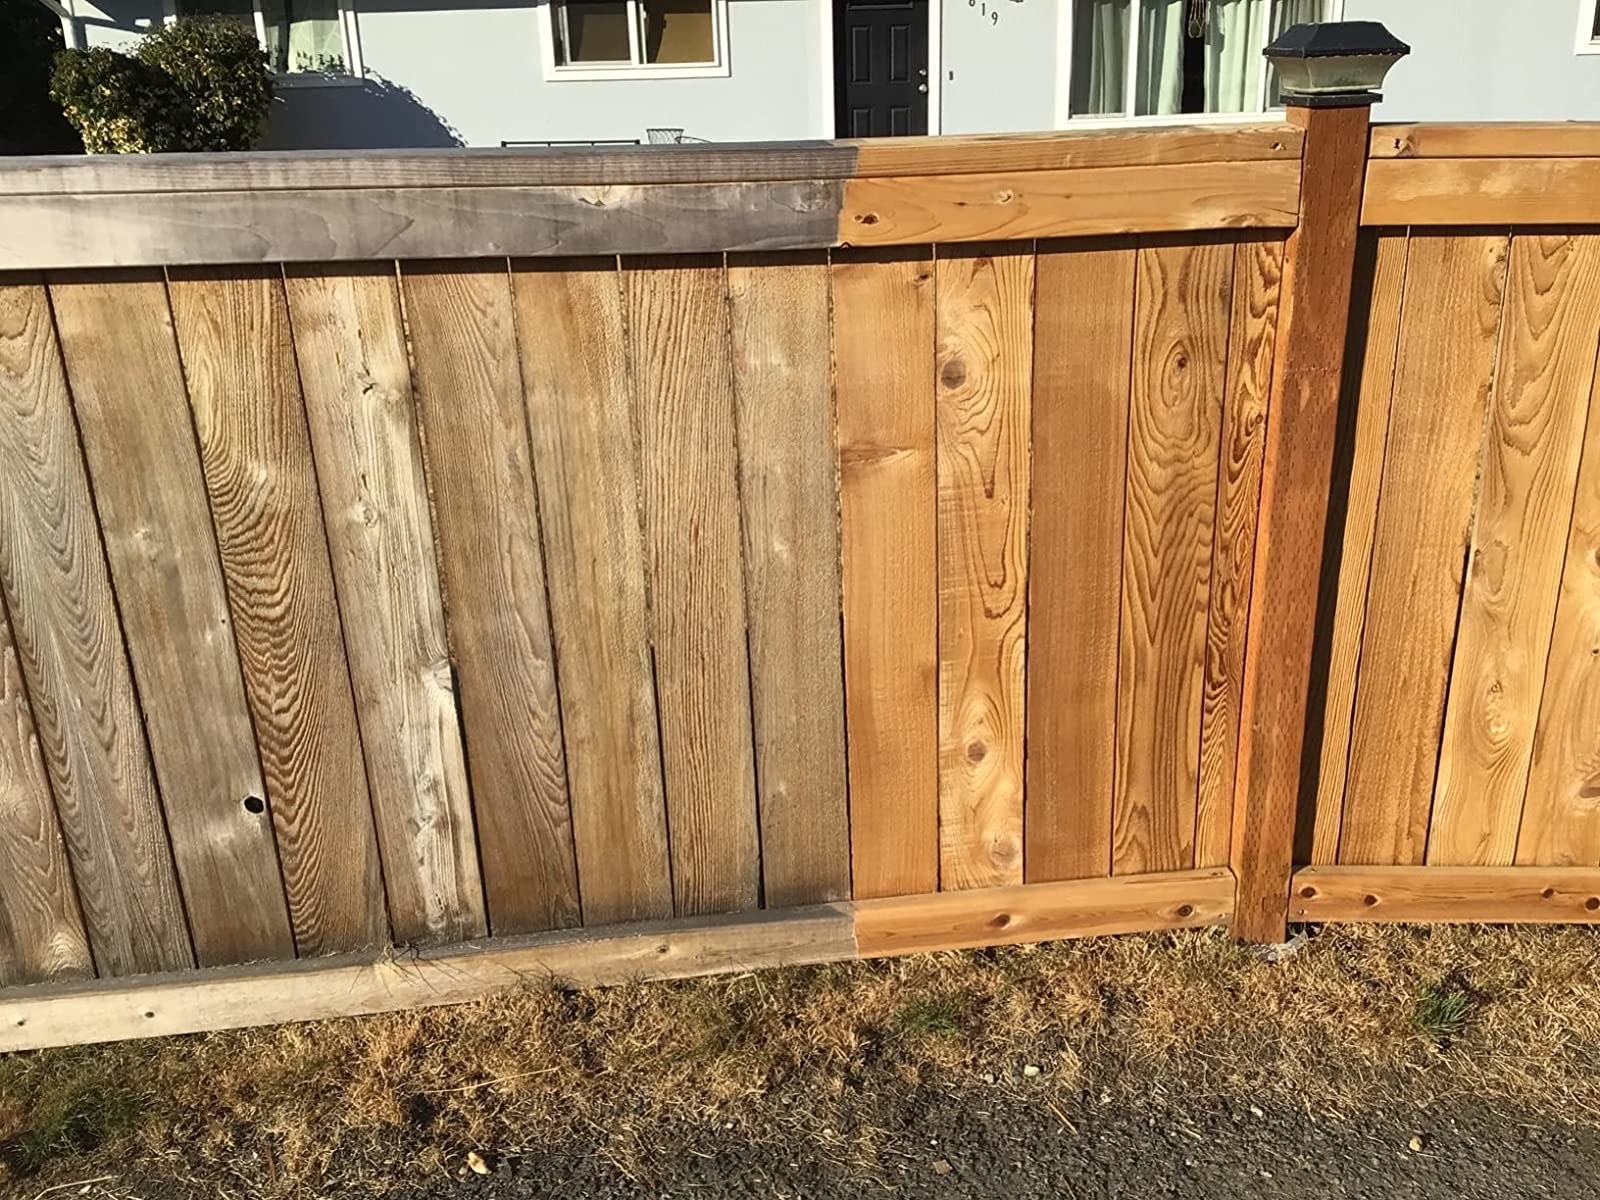 Reviewer&#x27;s photo of their fence showing one side before using the power washer and the other side after using the power washer